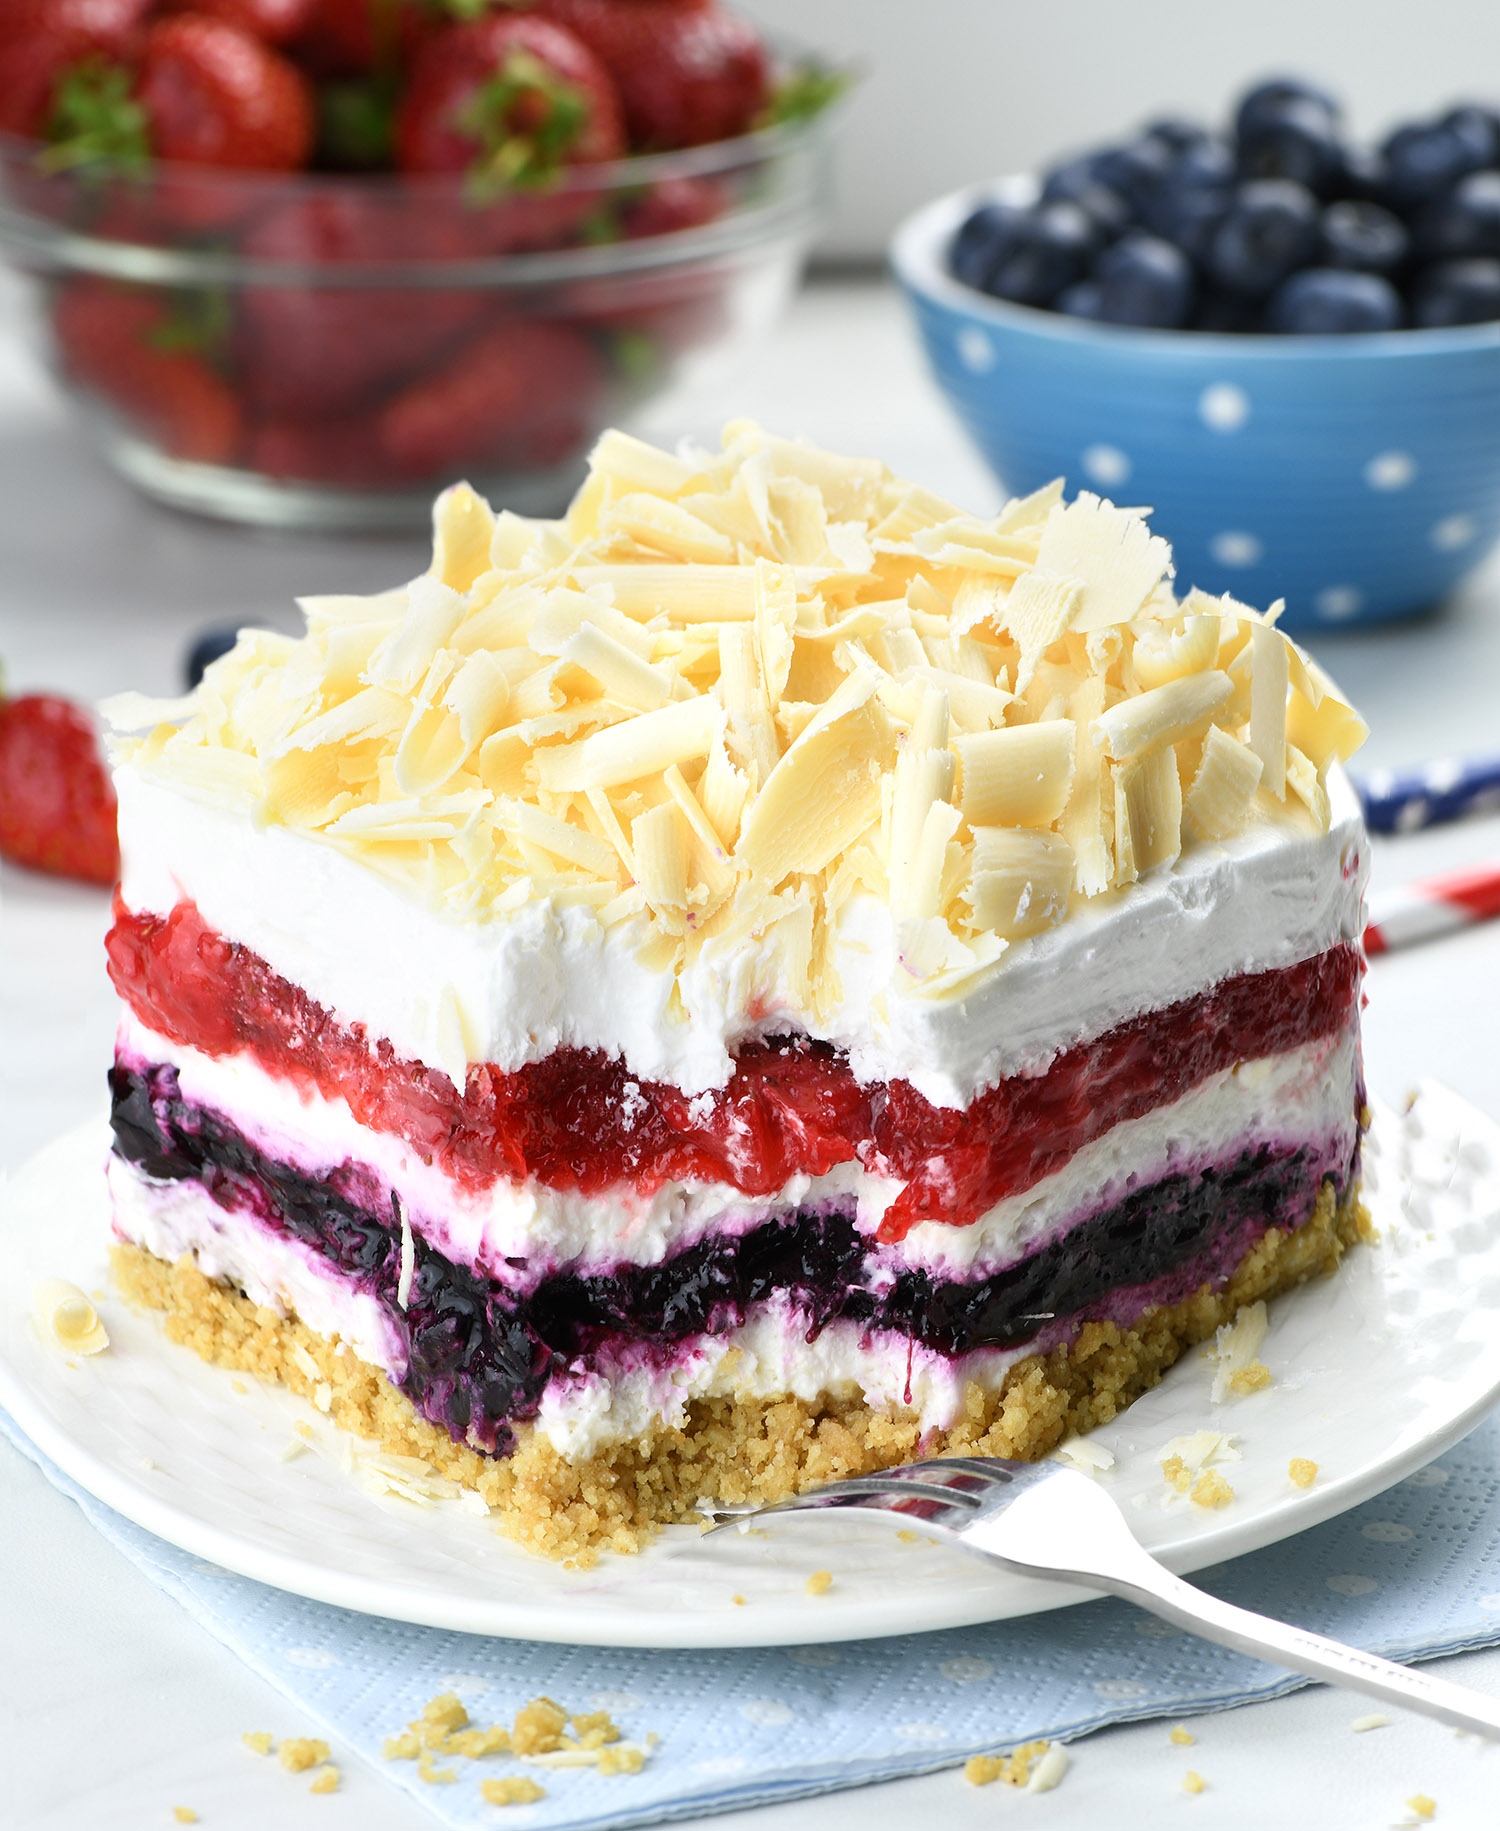 Close-up of a vibrant No Bake Berry Cheesecake Lasagna with layers of creamy cheesecake, red and purple berry fillings, topped with white chocolate shavings. Fresh strawberries and blueberries in bowls are in the background.